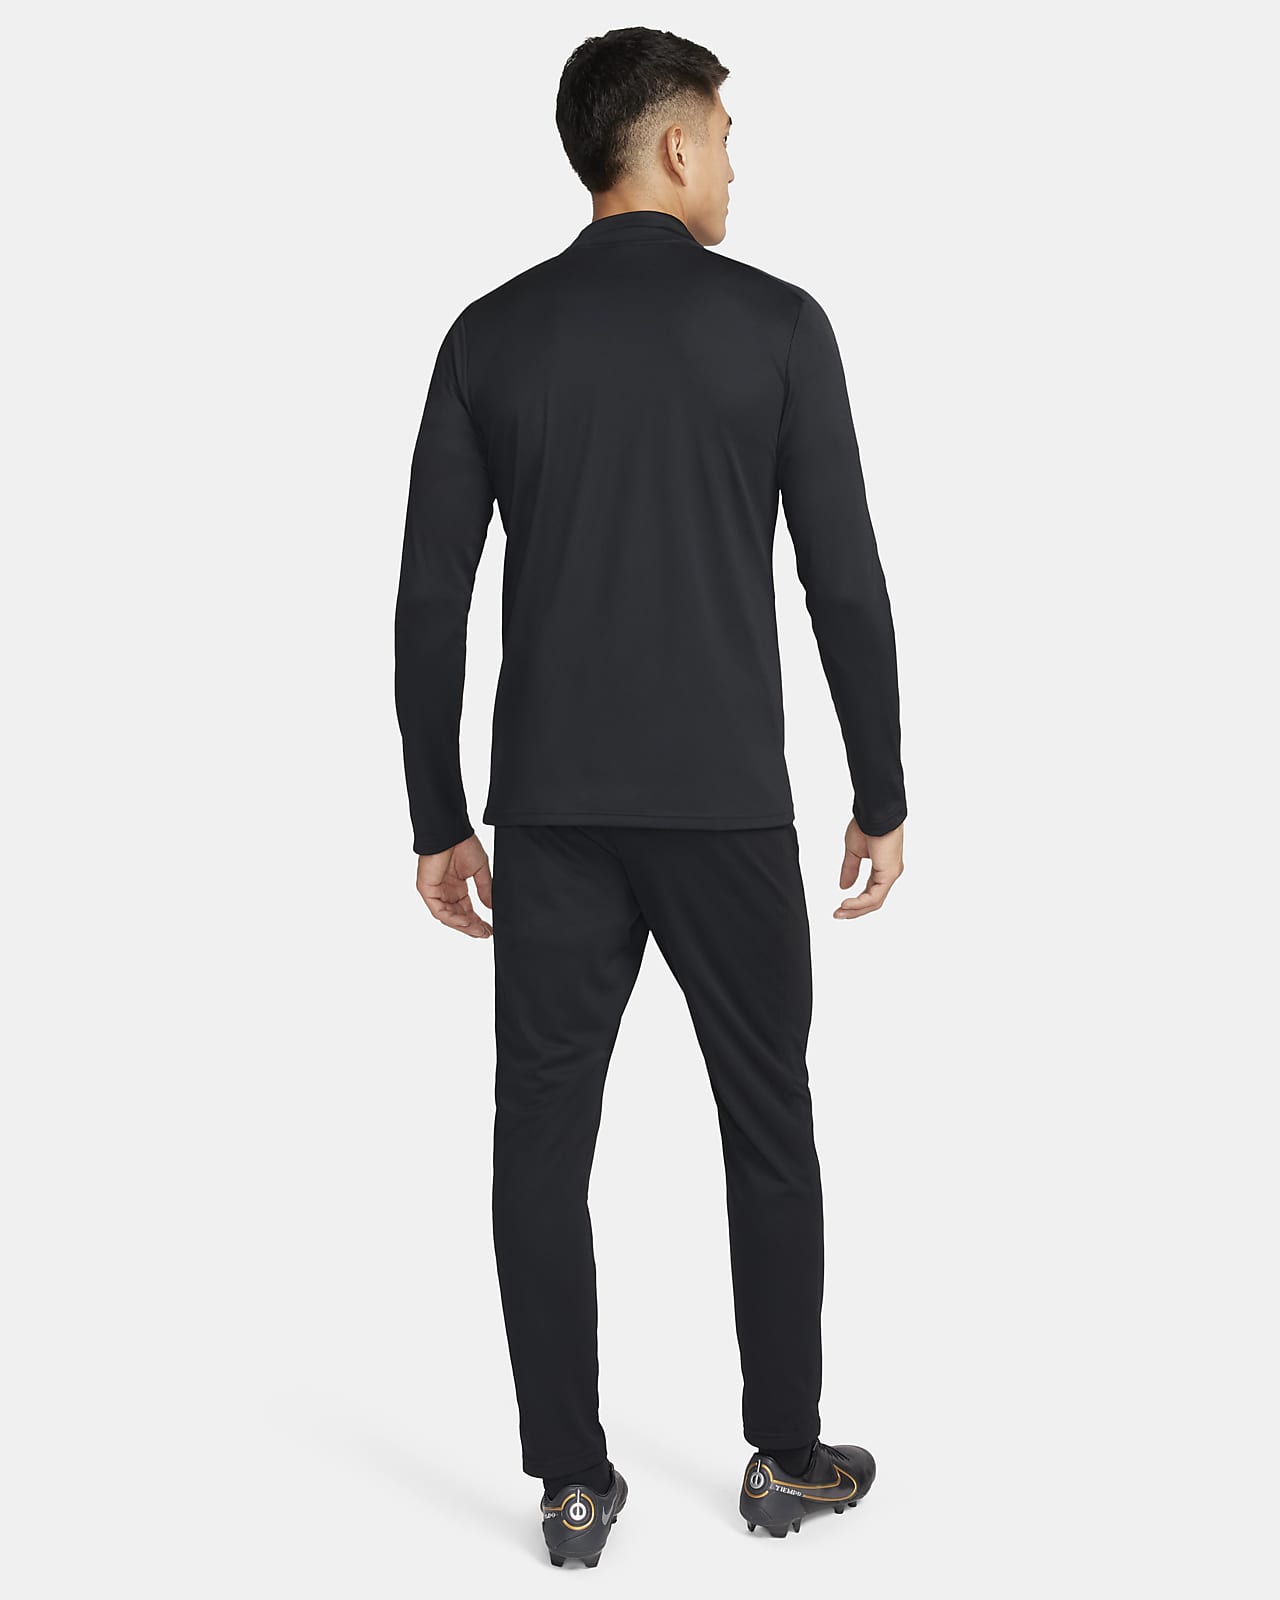 Men's Nike Tracksuits & Dry Fit Tracksuit